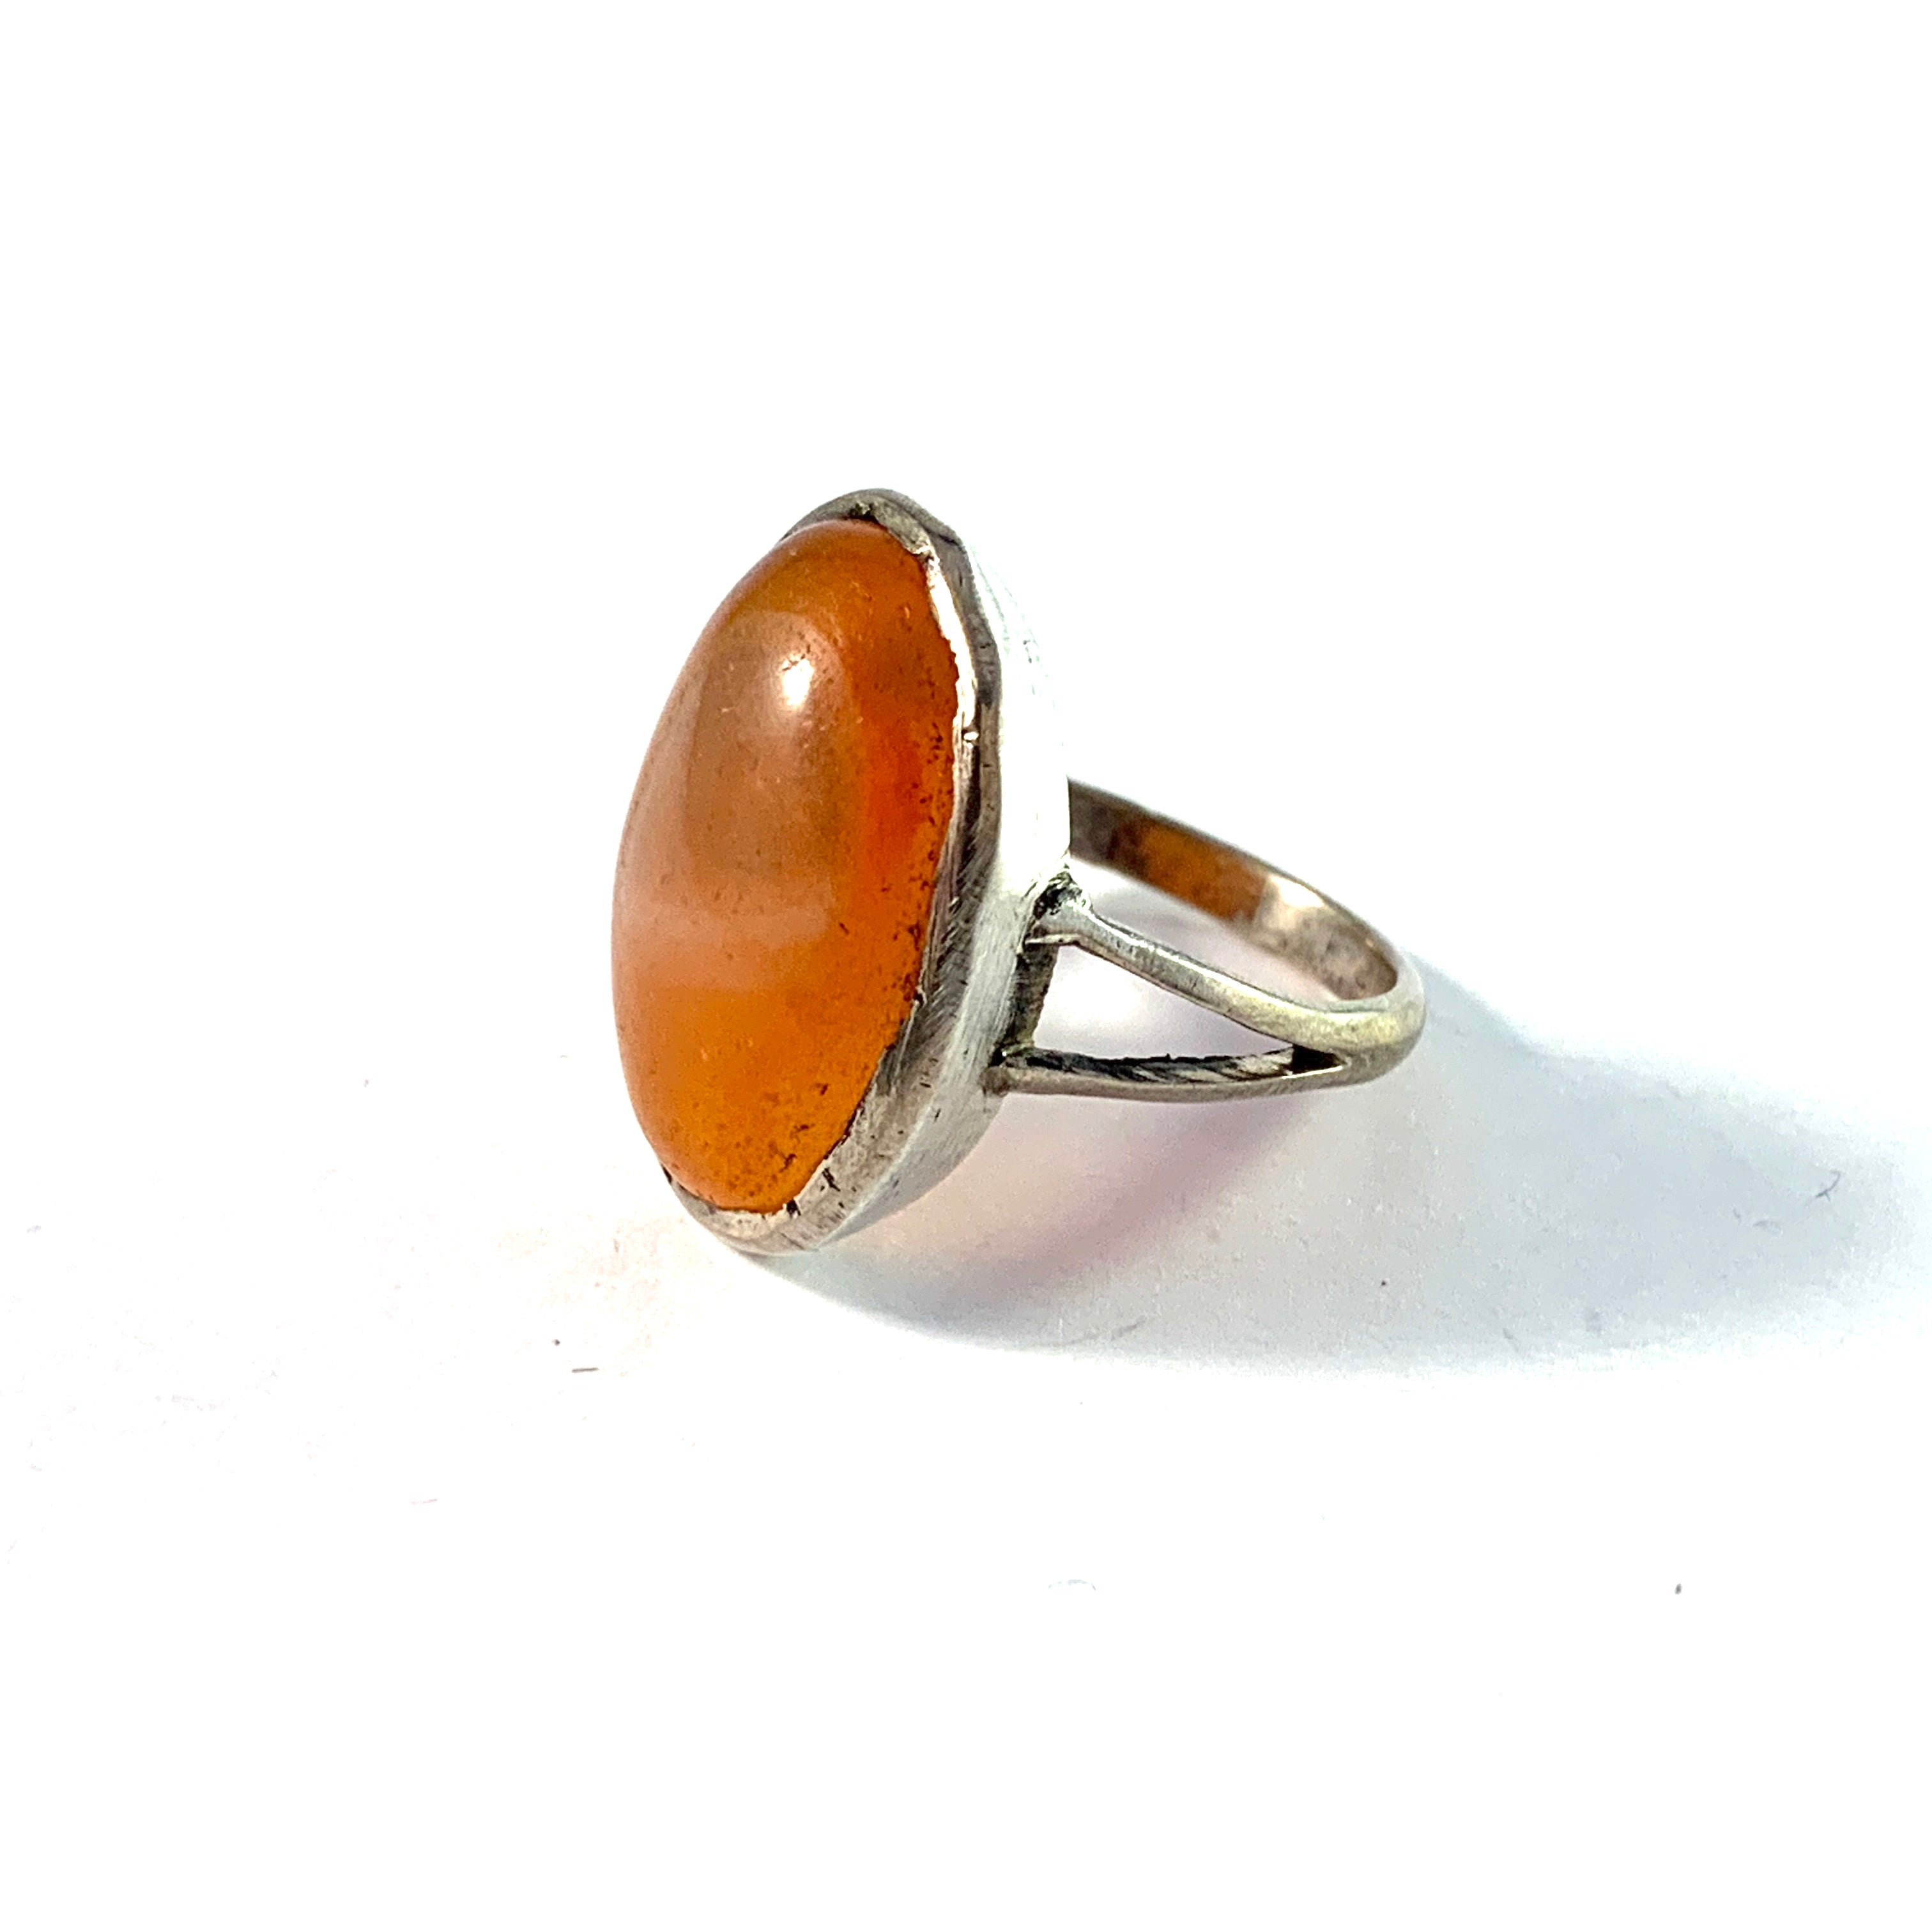 Scandinavia Early to Mid 1800s Antique Solid Silver Carnelian Ring. – T ...